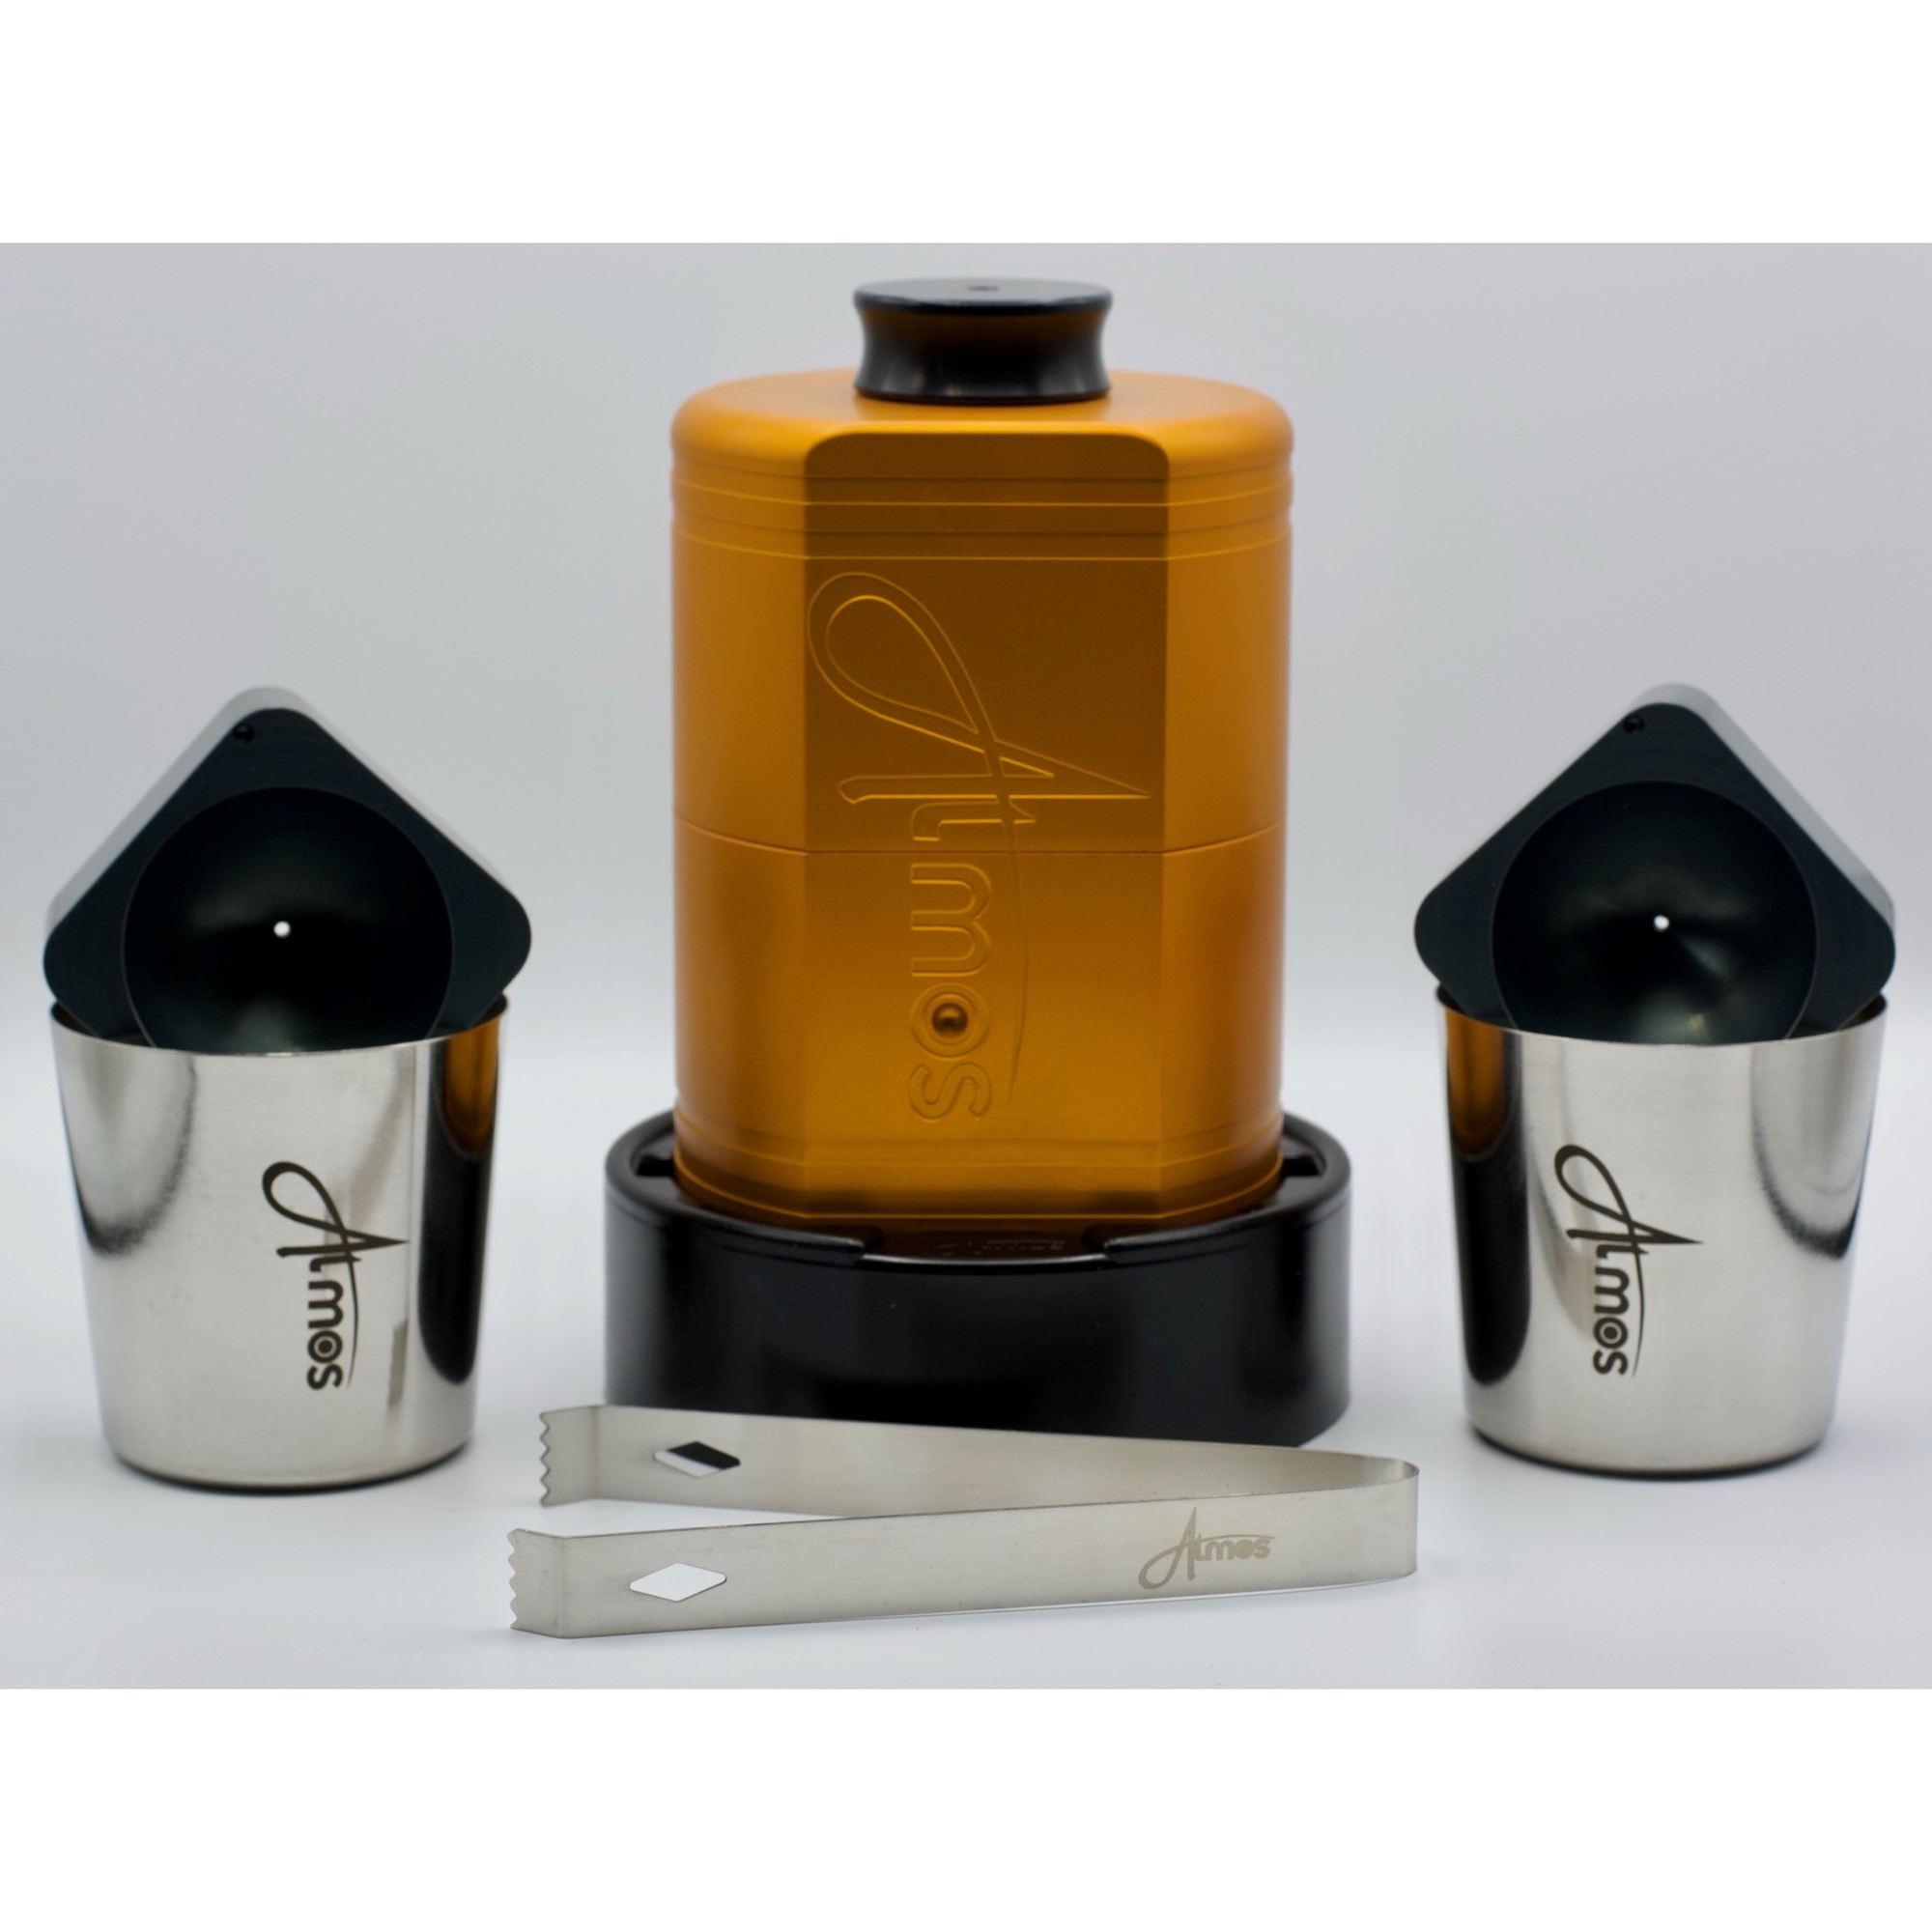 Atmos Ice Press Deluxe Set (includes 3 additional shapes)